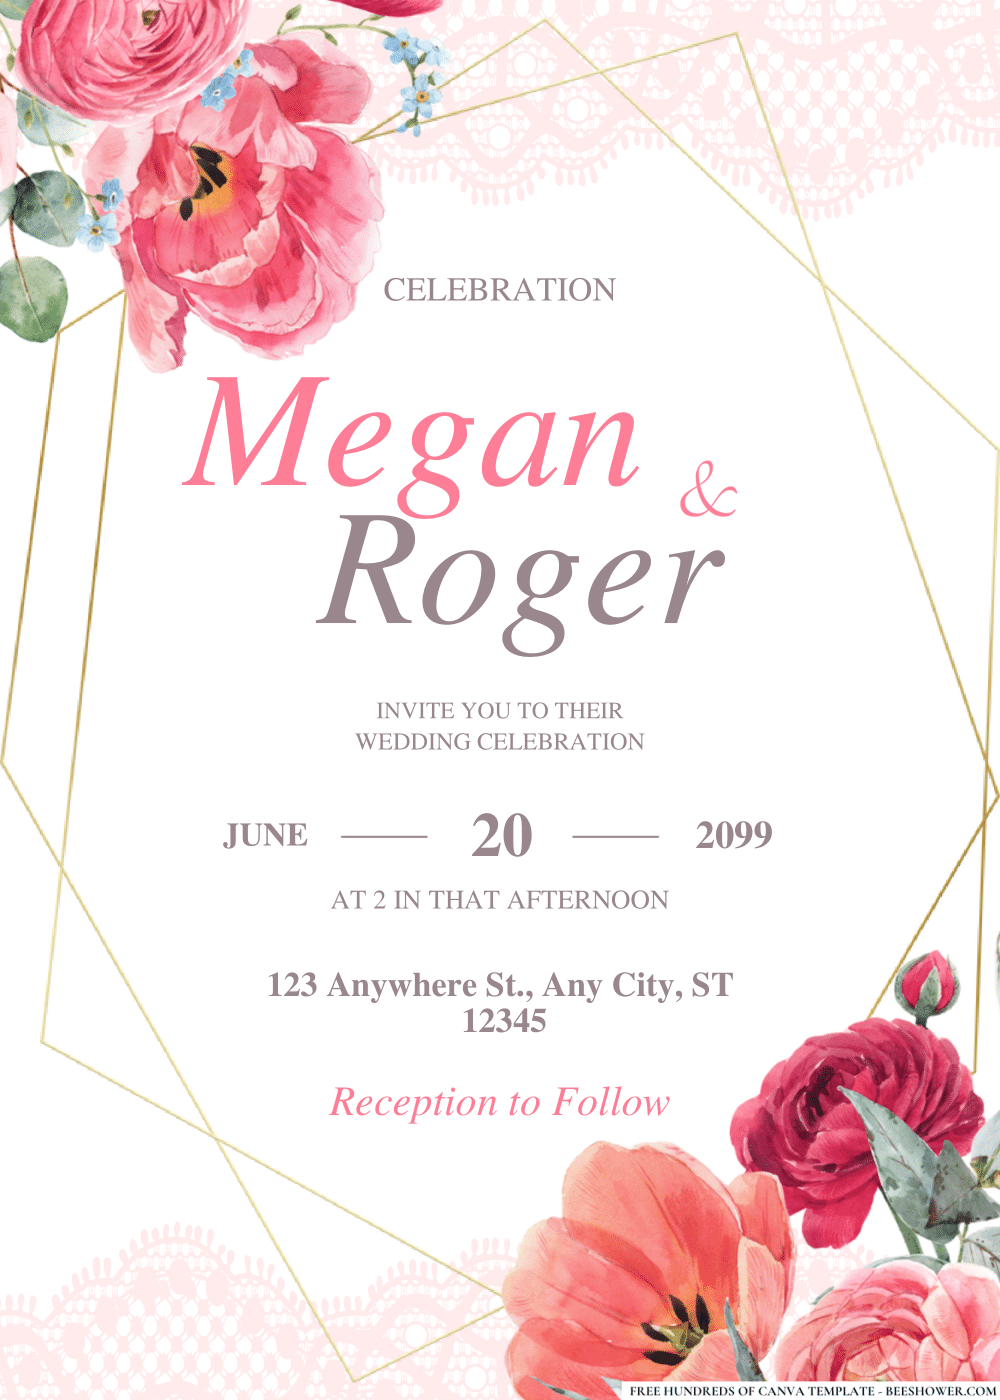 Pink Peonies and Lace Wedding Invitation